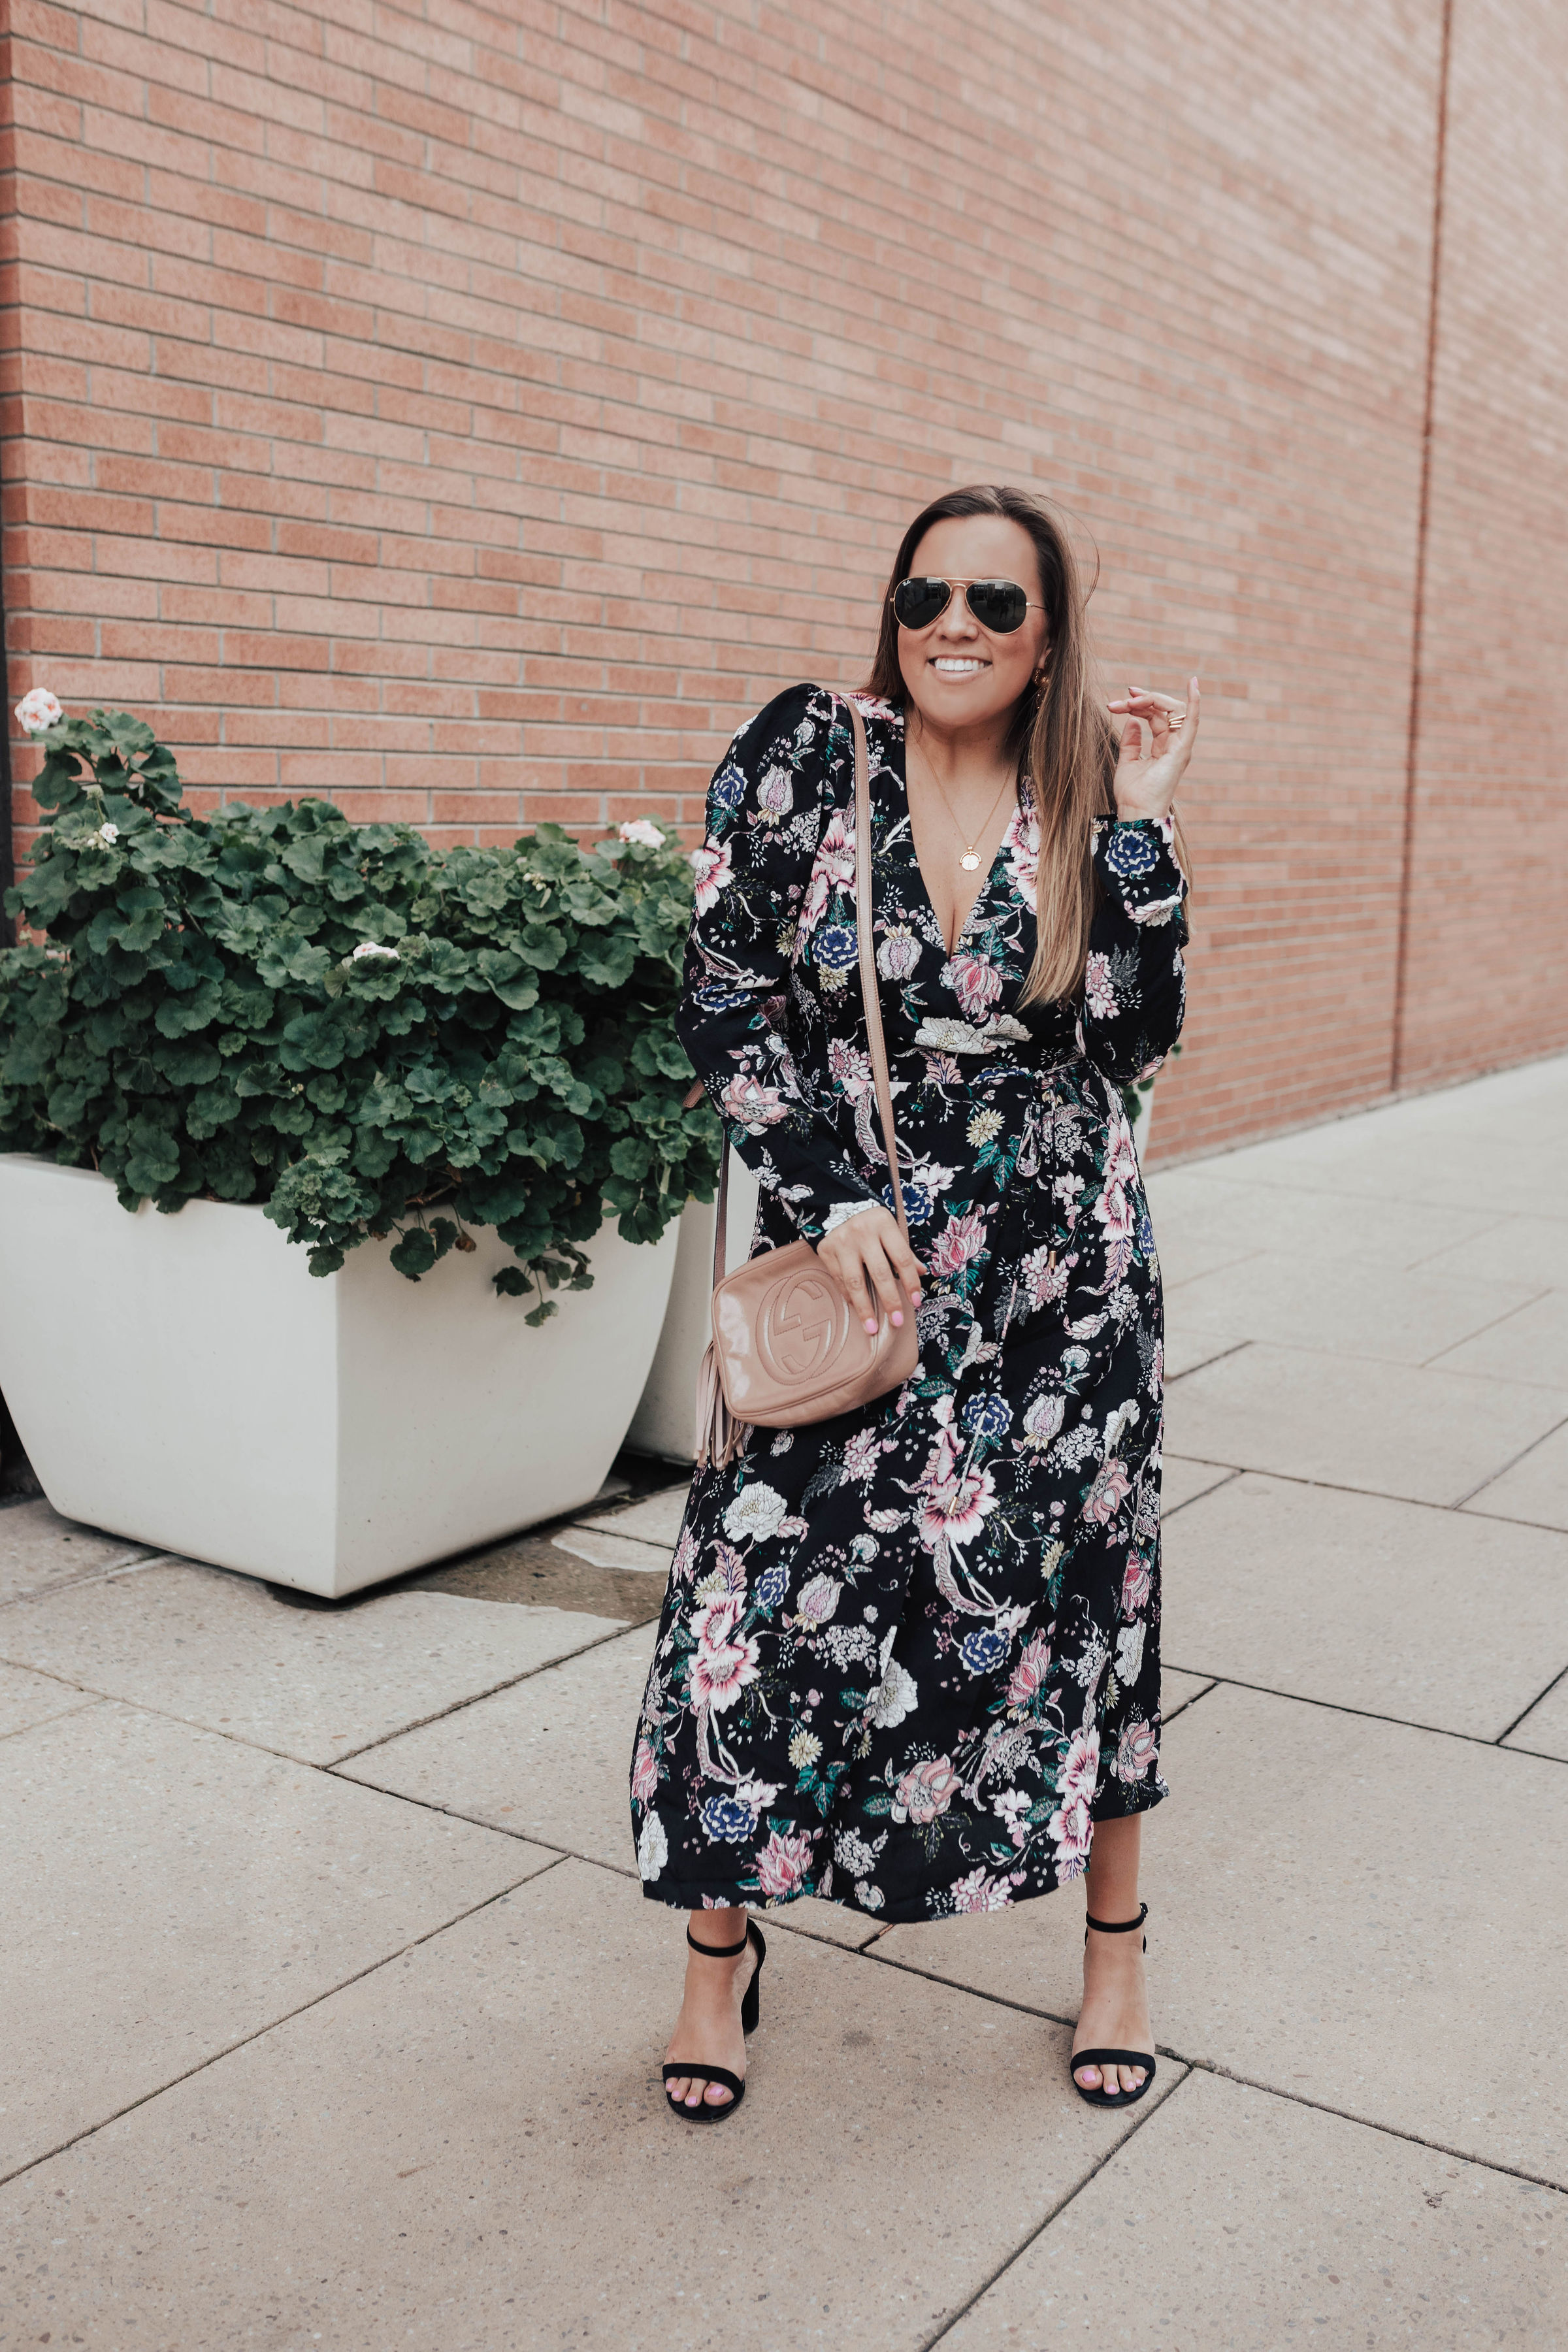 San Francisco blogger, Ashley Zeal from Two Peas in a Prada shares her favorite bridal shower dresses. She chose the best for the bride, and those attending a shower!